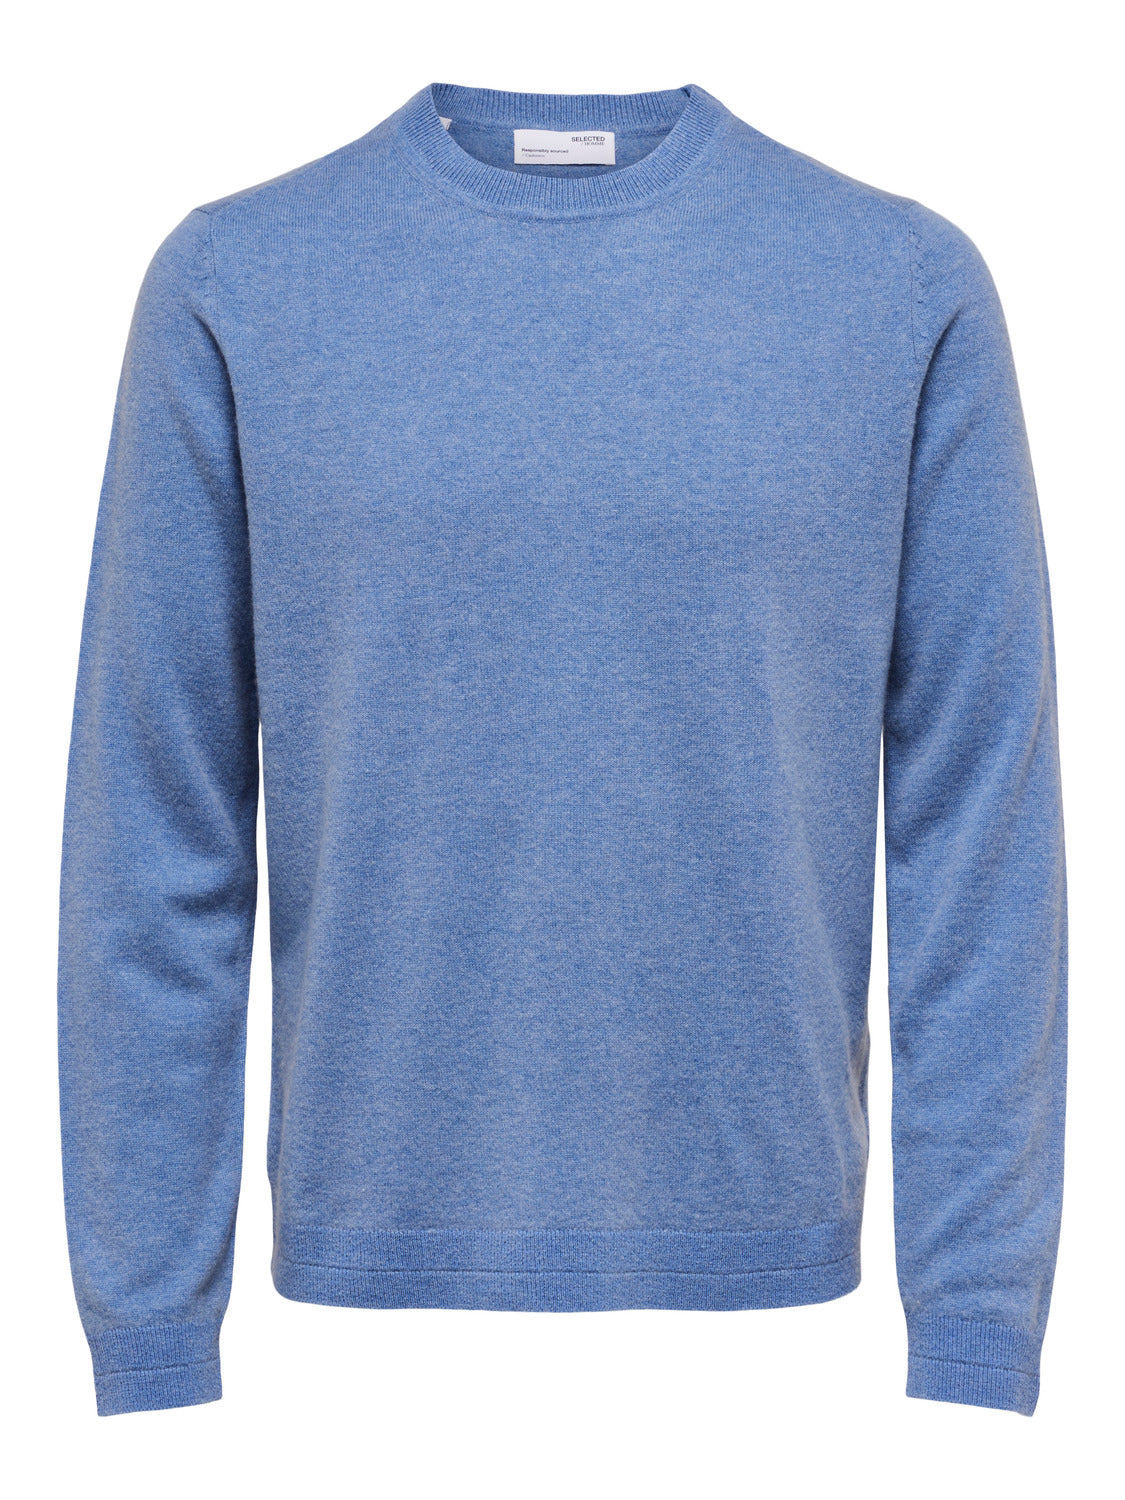 SELECTED HOMME - MAXWELL Pullover - Bel Air Blue